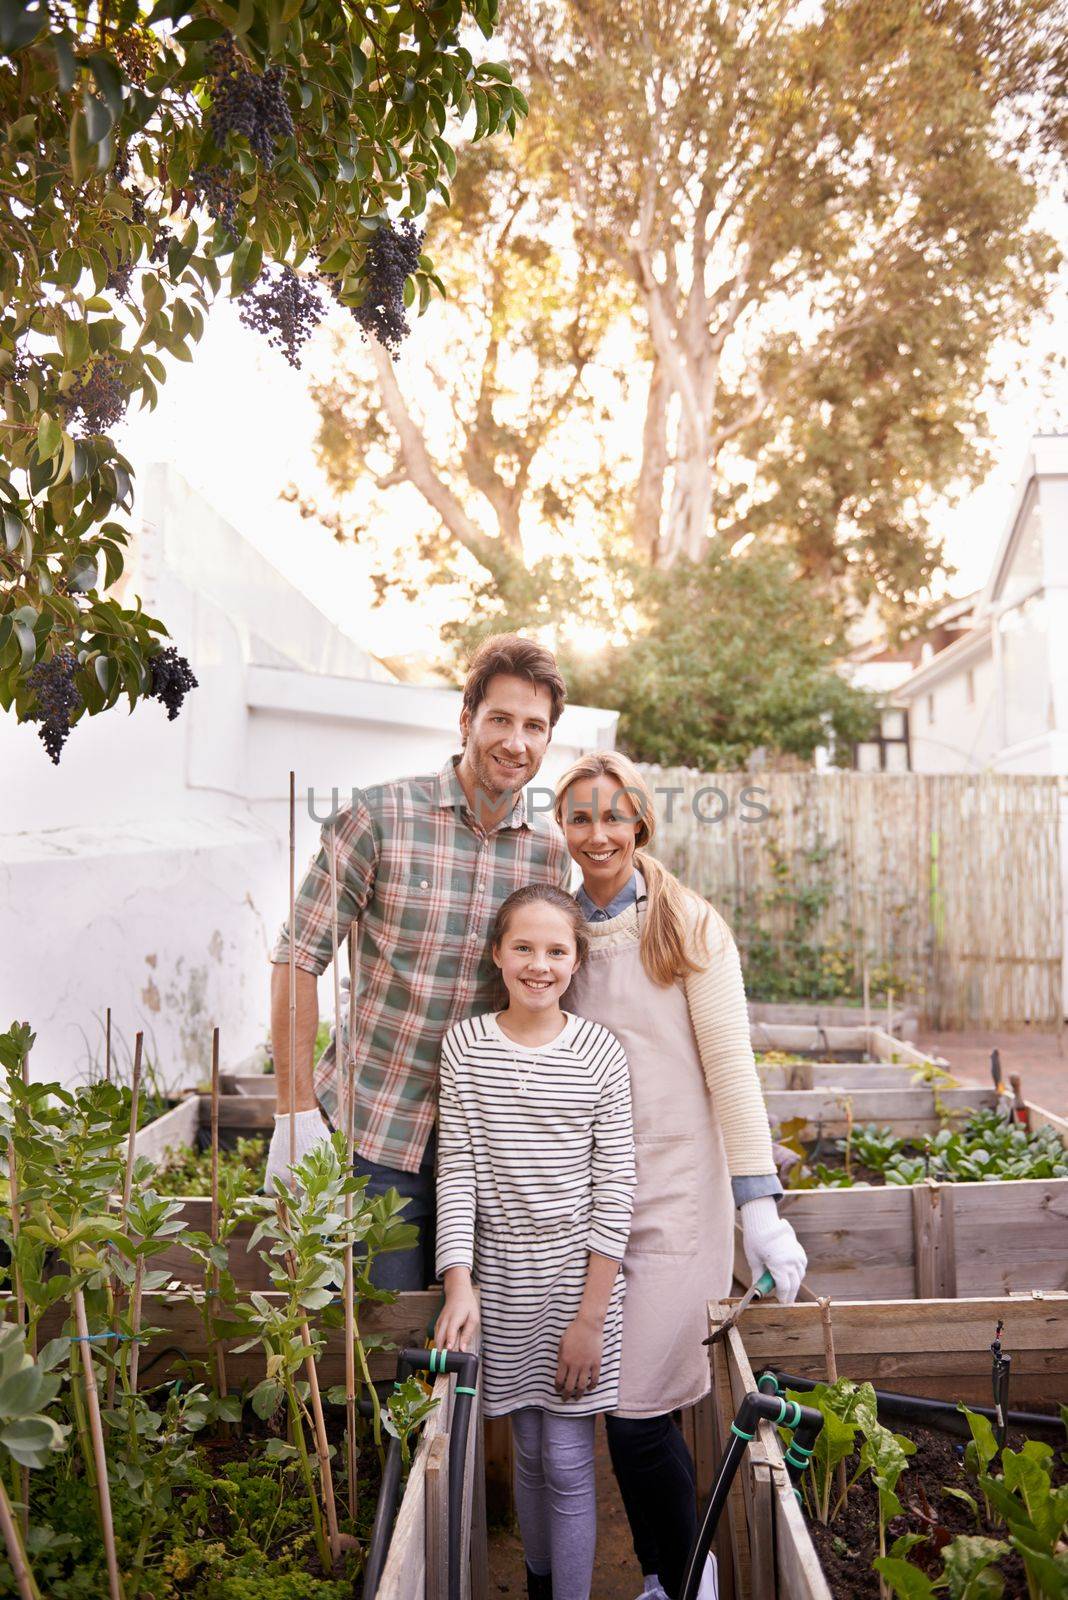 This family is going green. Portrait of a happy family gardening together in their backyard